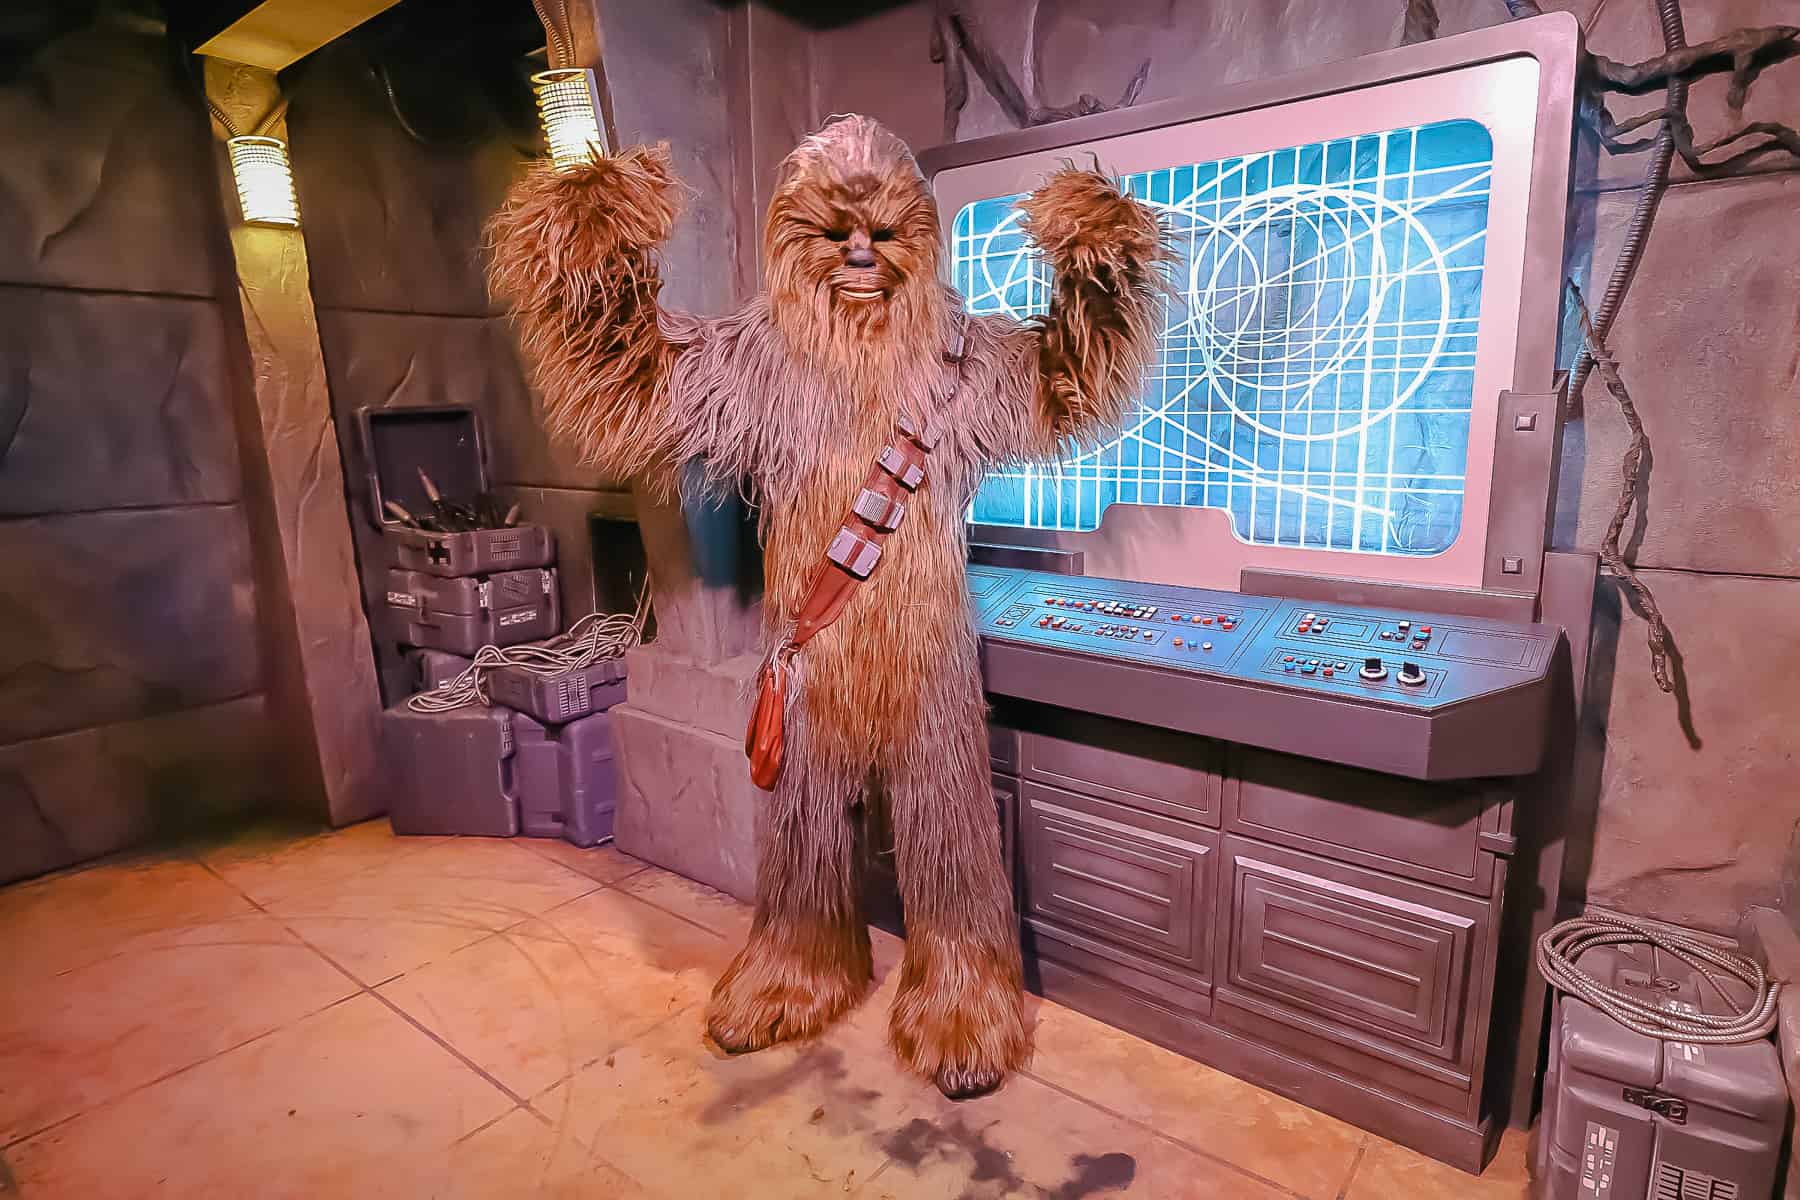 Chewbacca from Star Wars at Disney's Hollywood Studios